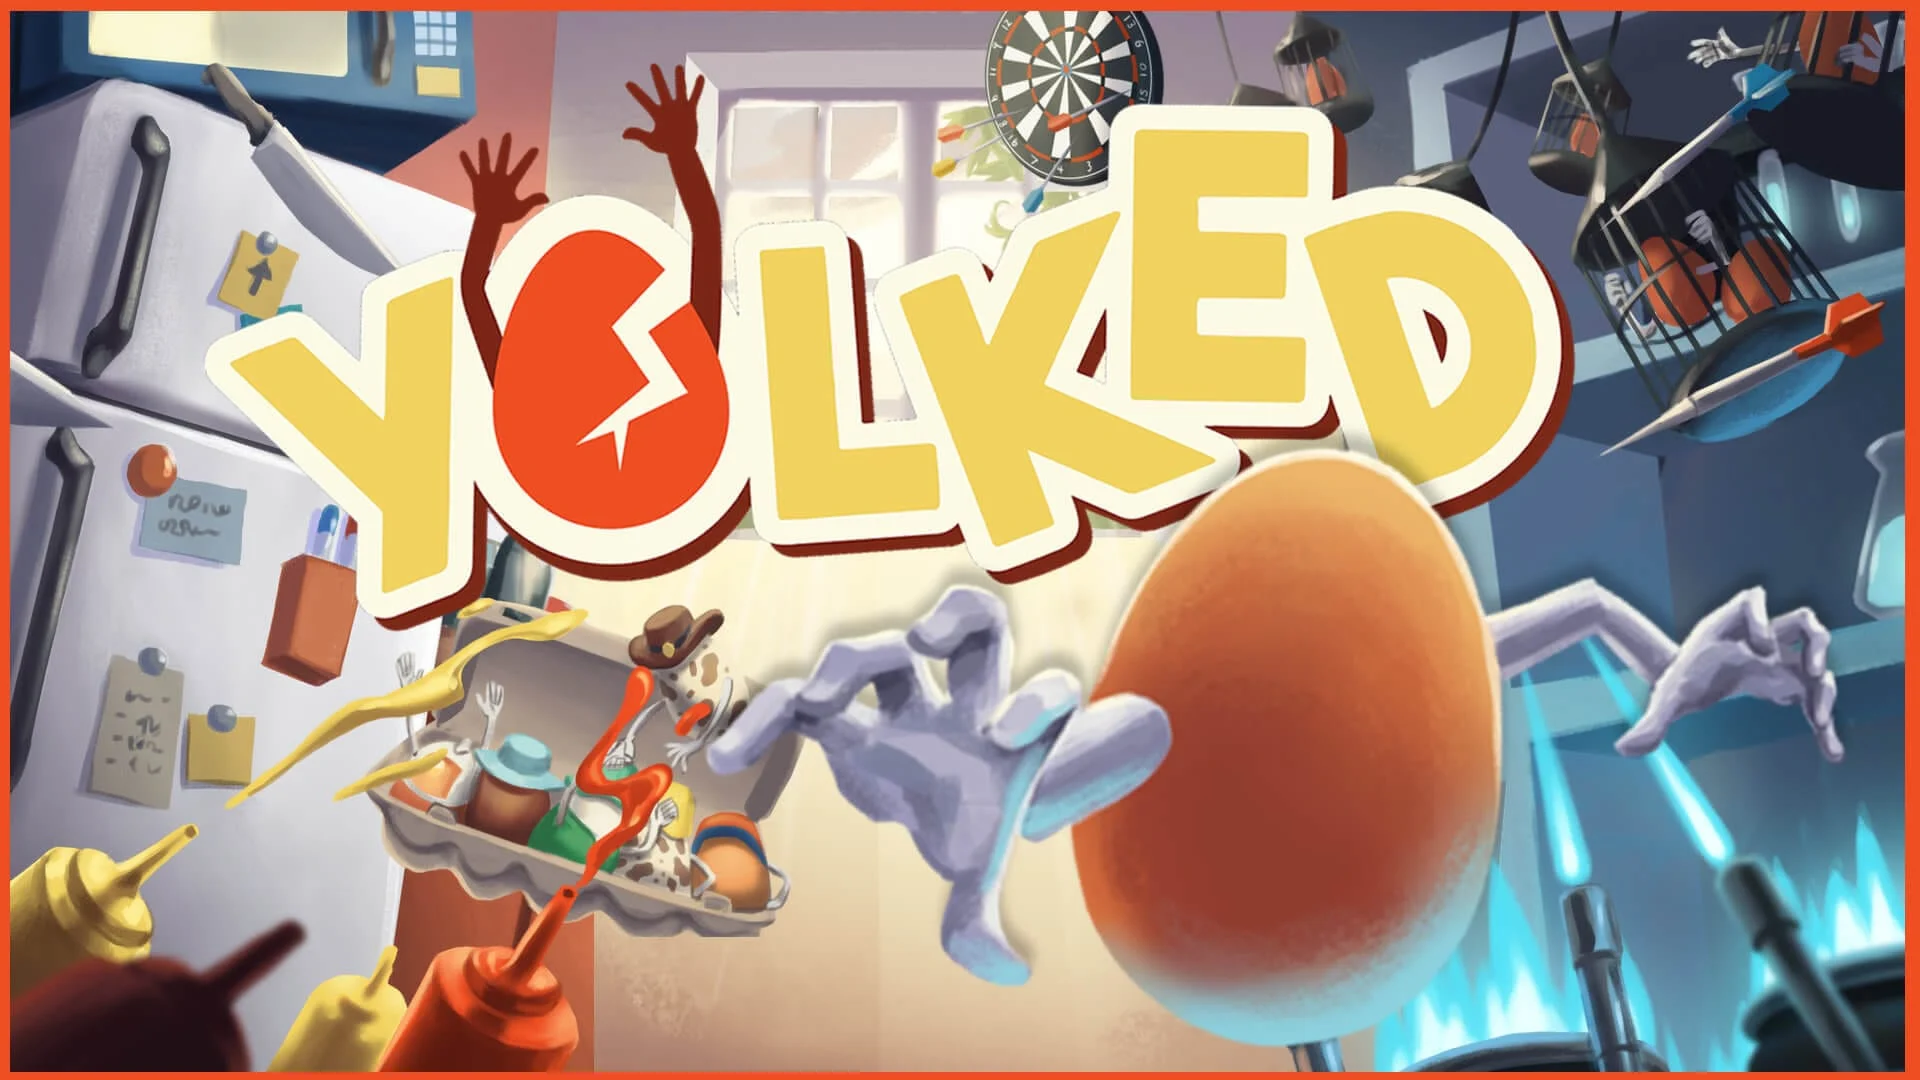 YOLKED – The Egg Game Review